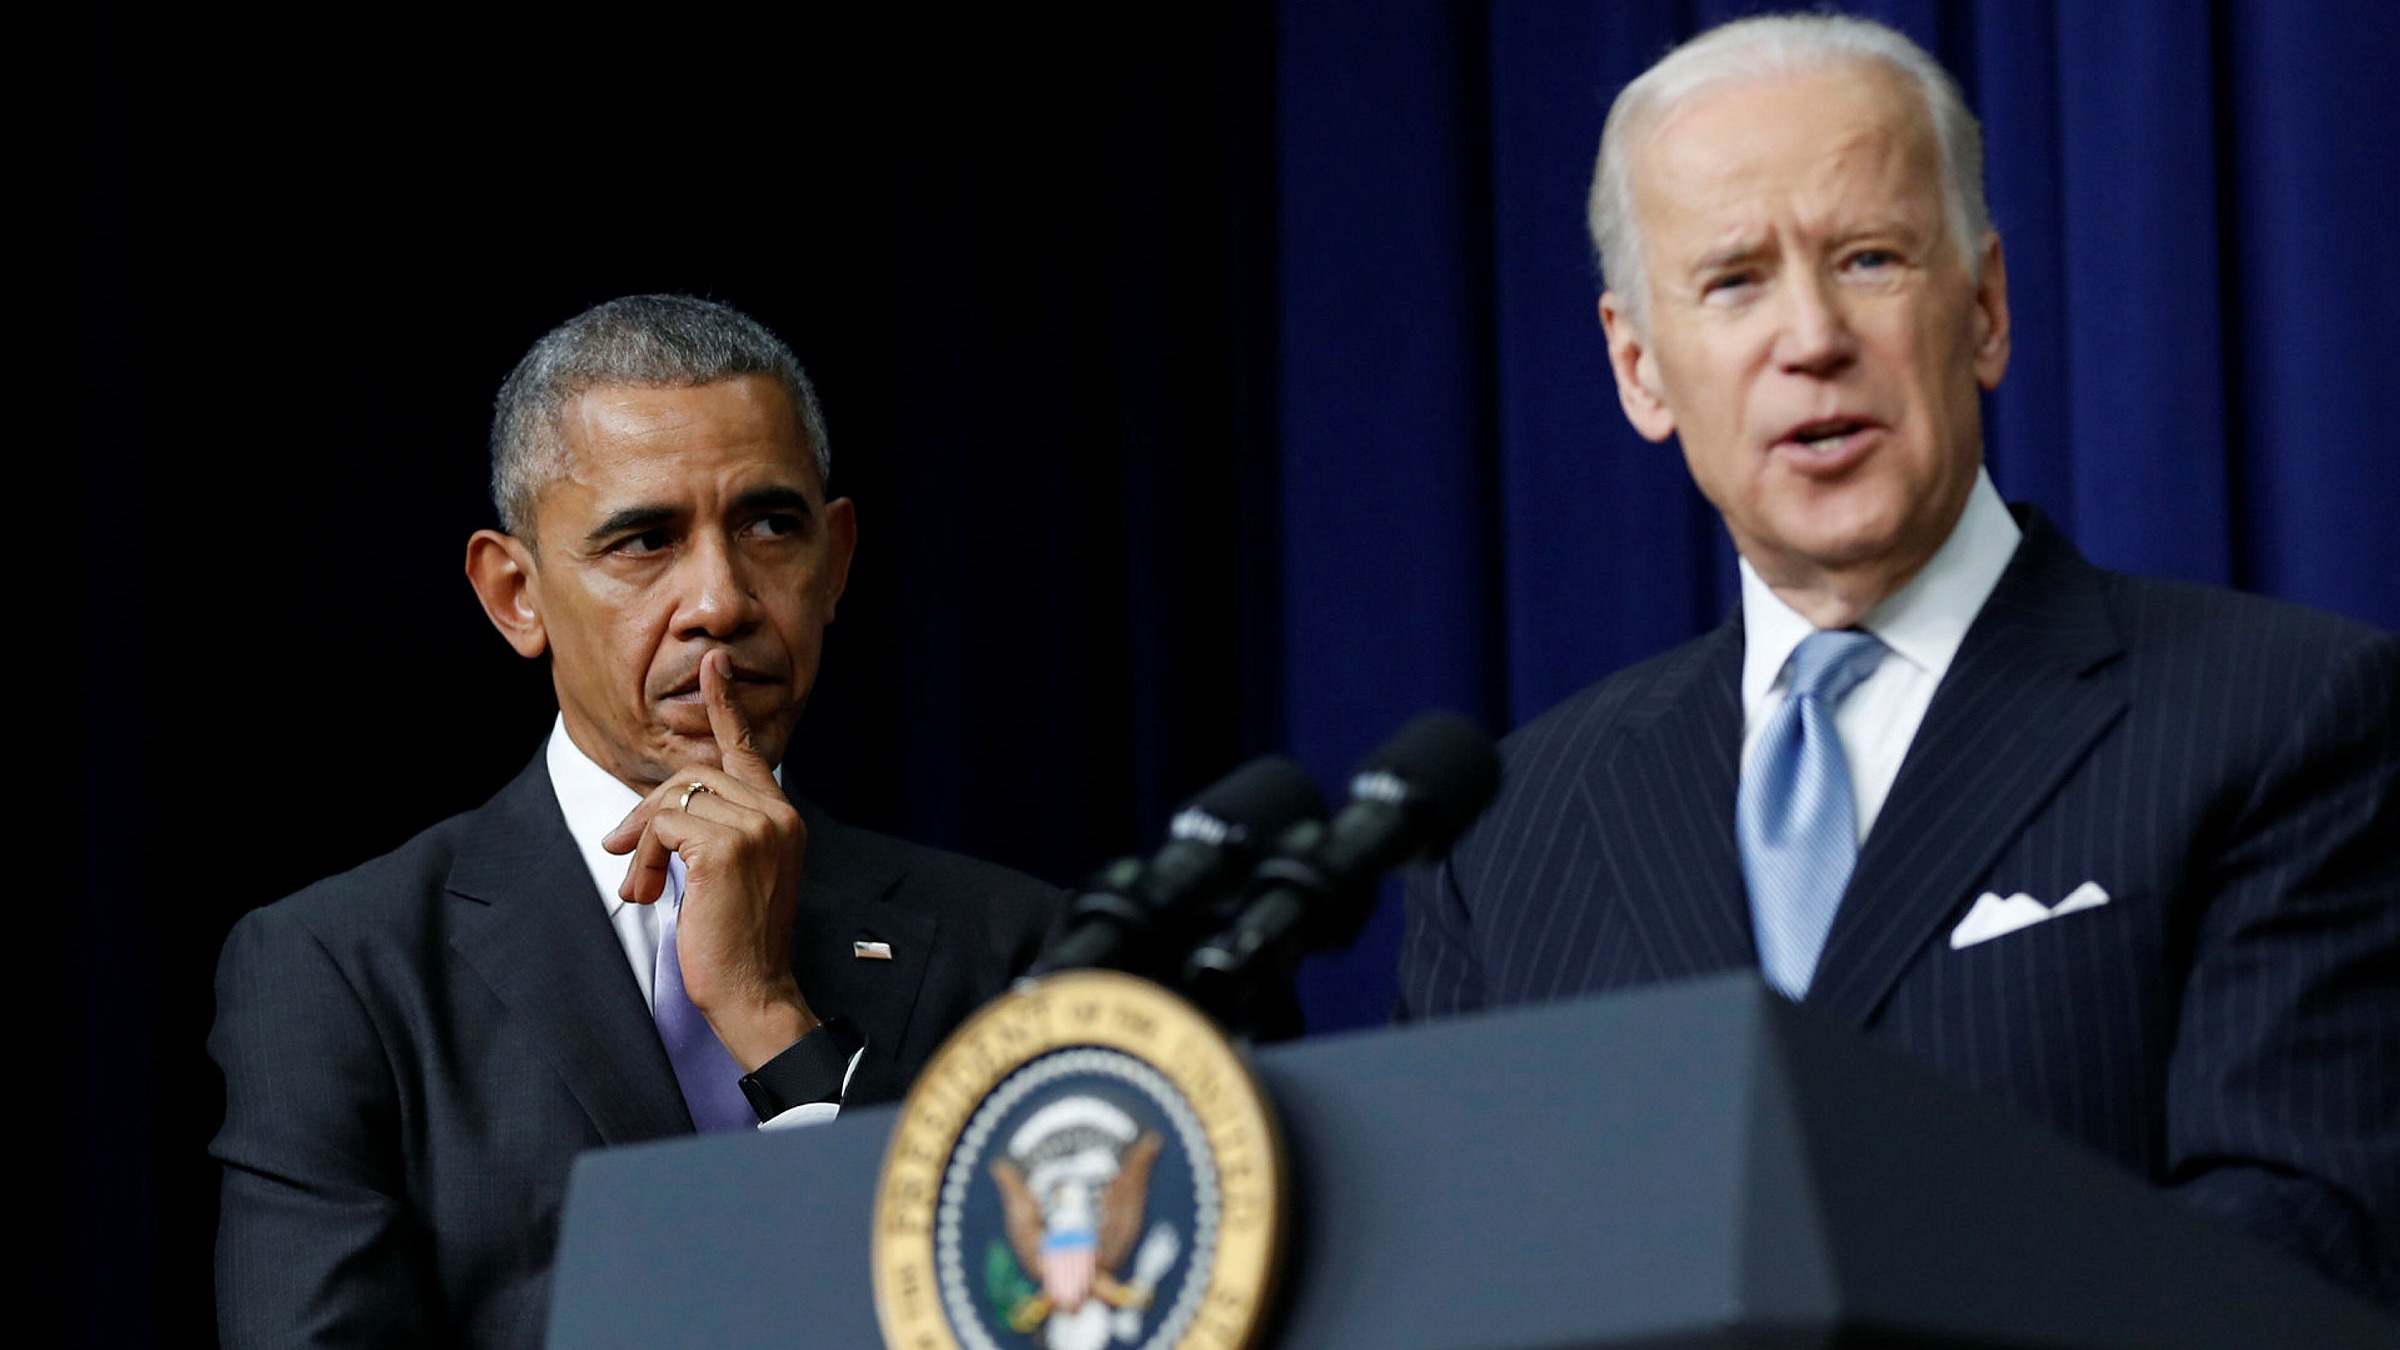 Barack Obama brings his support to Joe Biden's presidential campaign |  Financial Times